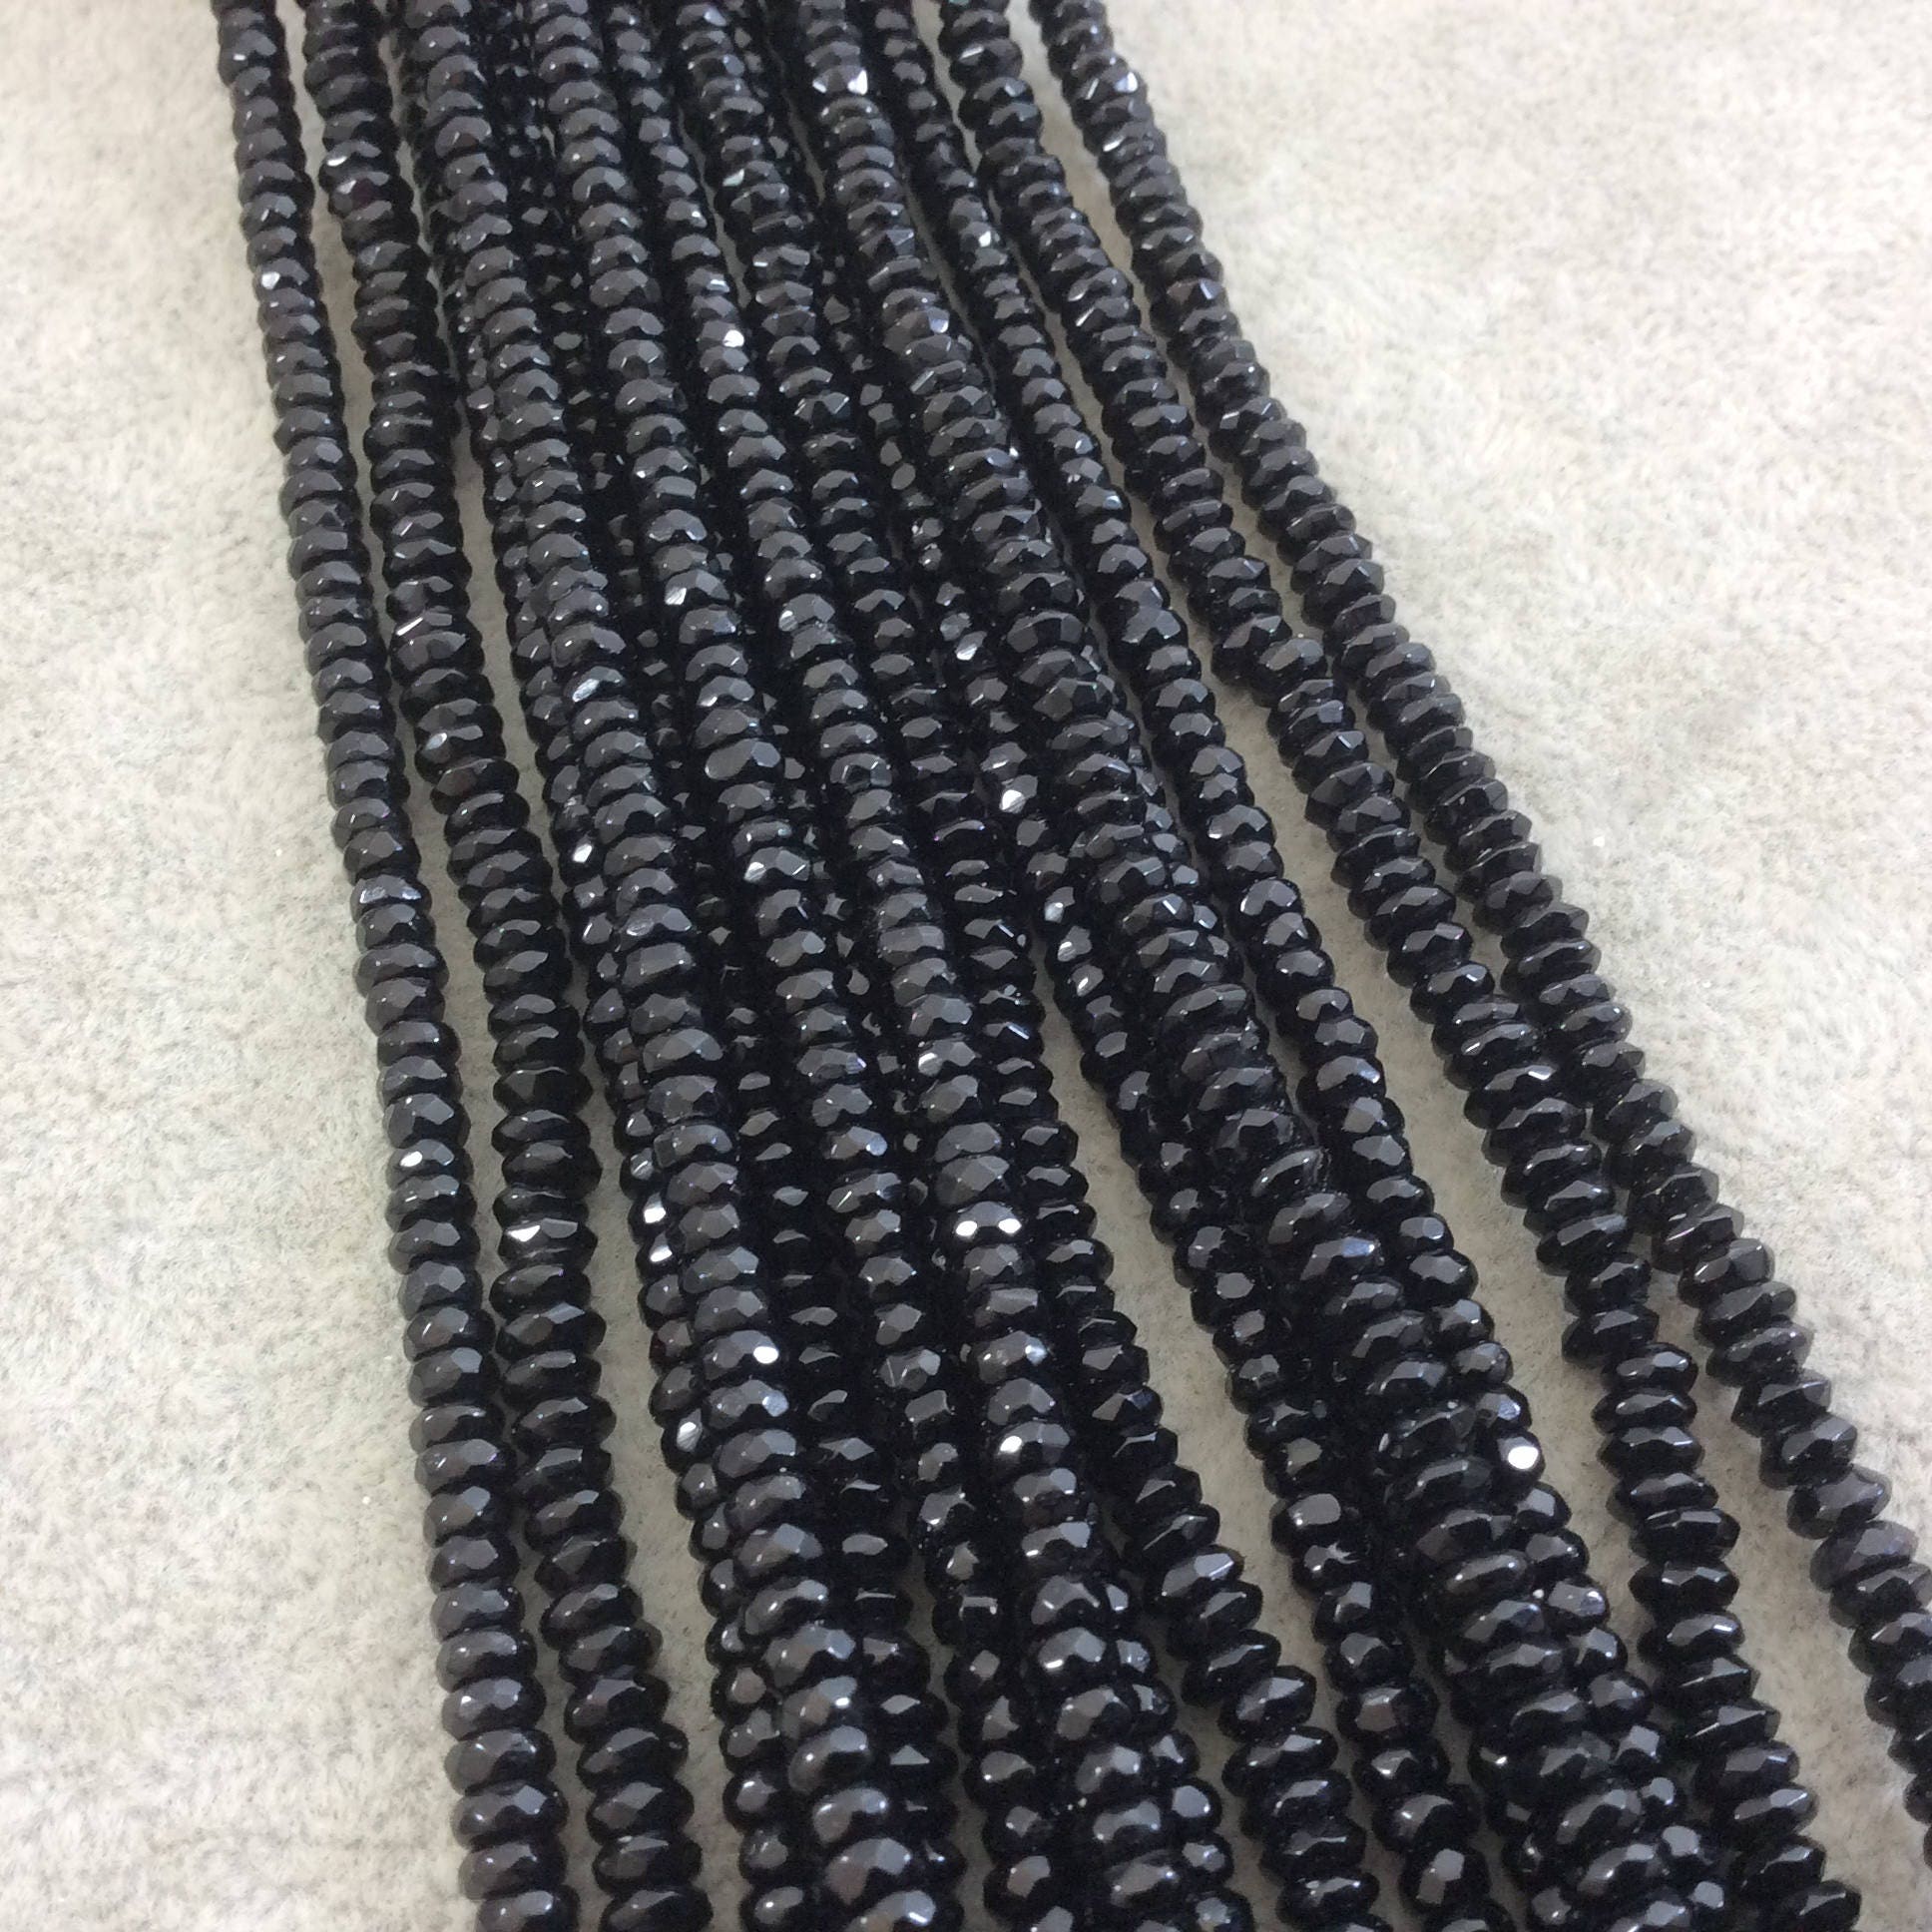 Black Agate Faceted Rondelle Beads - 2mm x 4mm